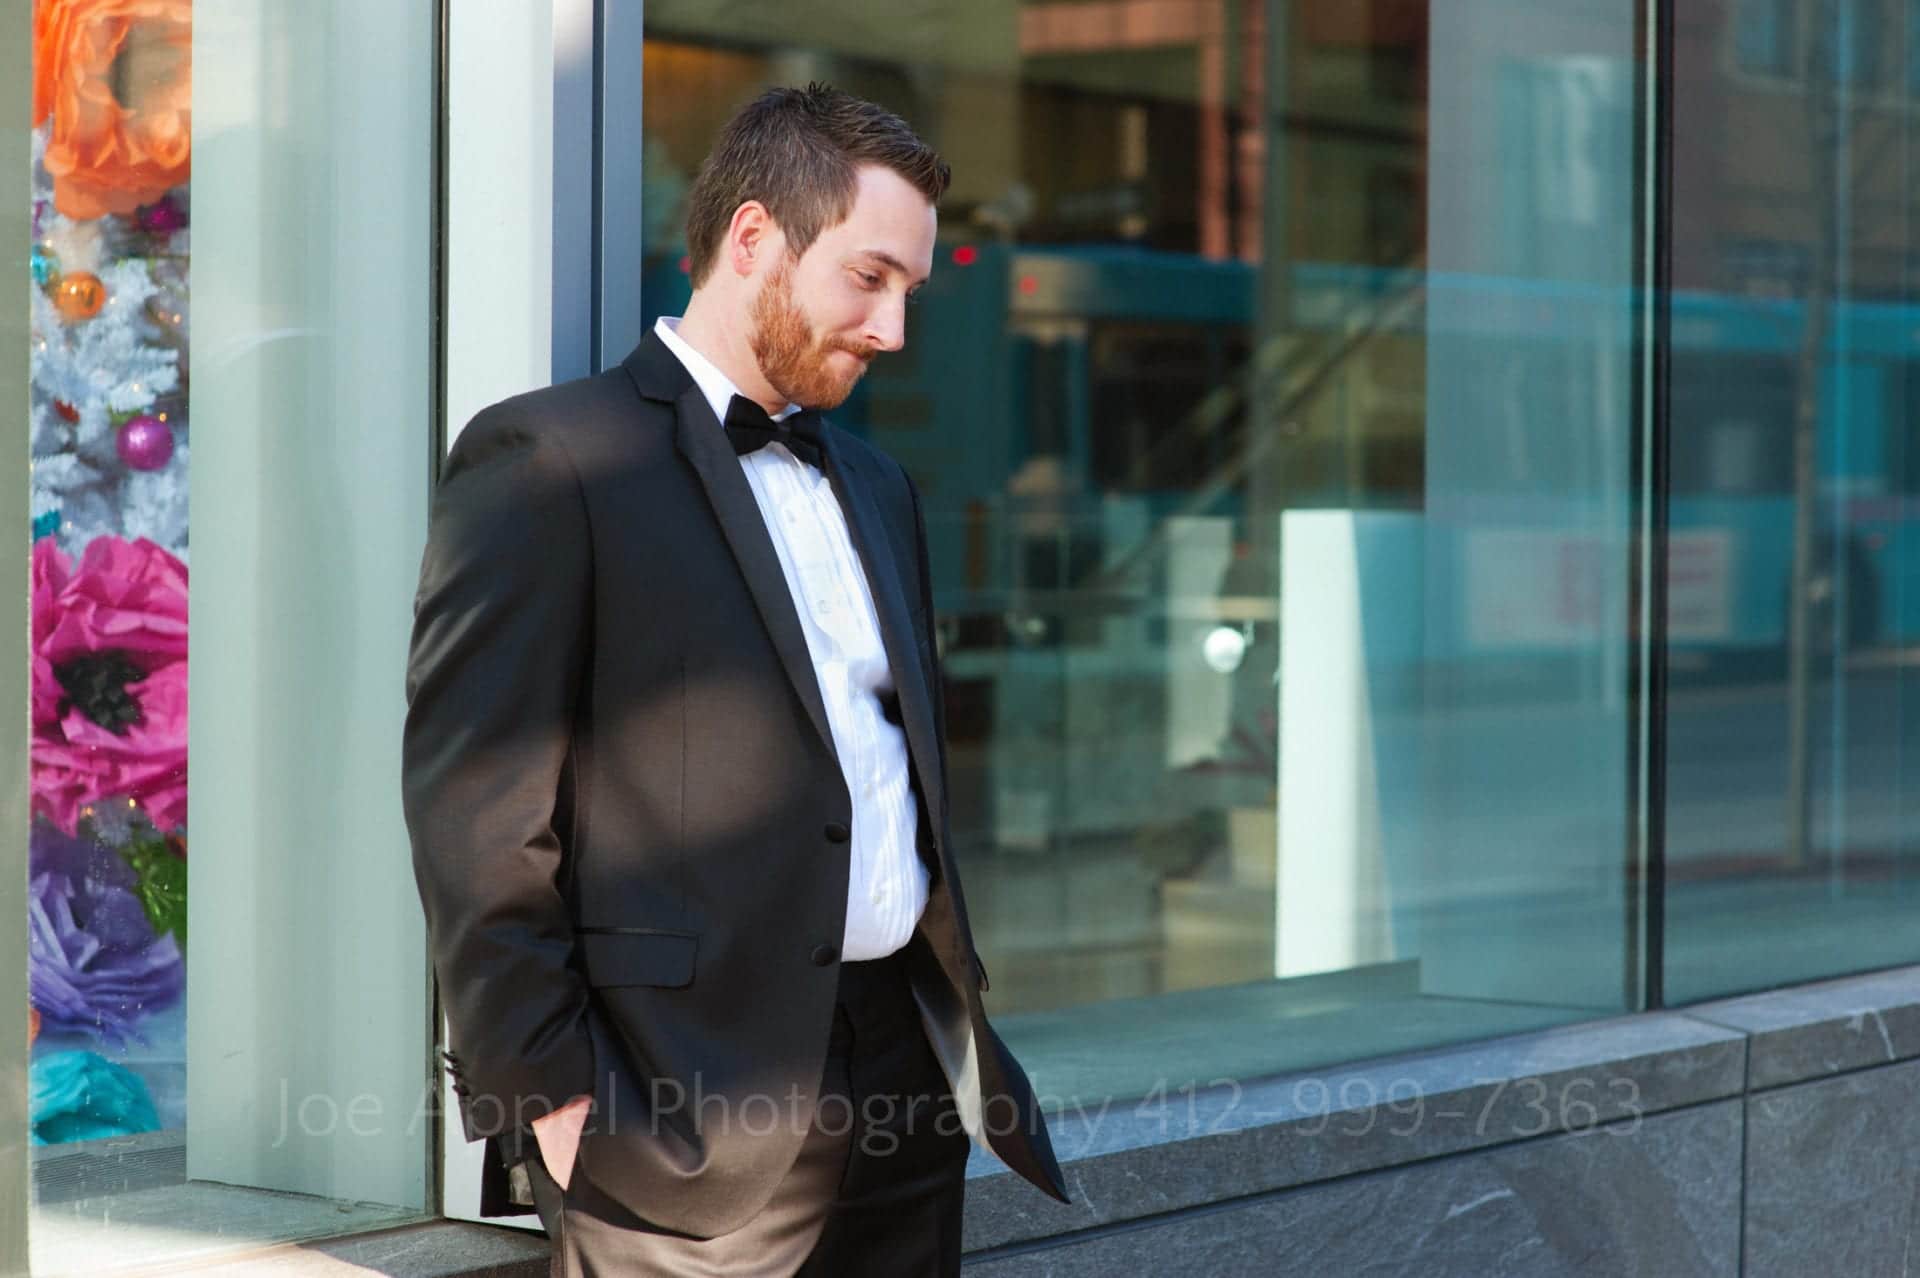 A tuxedoed man leans against a window as he stands with his hands in his pockets Fairmont Hotel Pittsburgh Weddings.